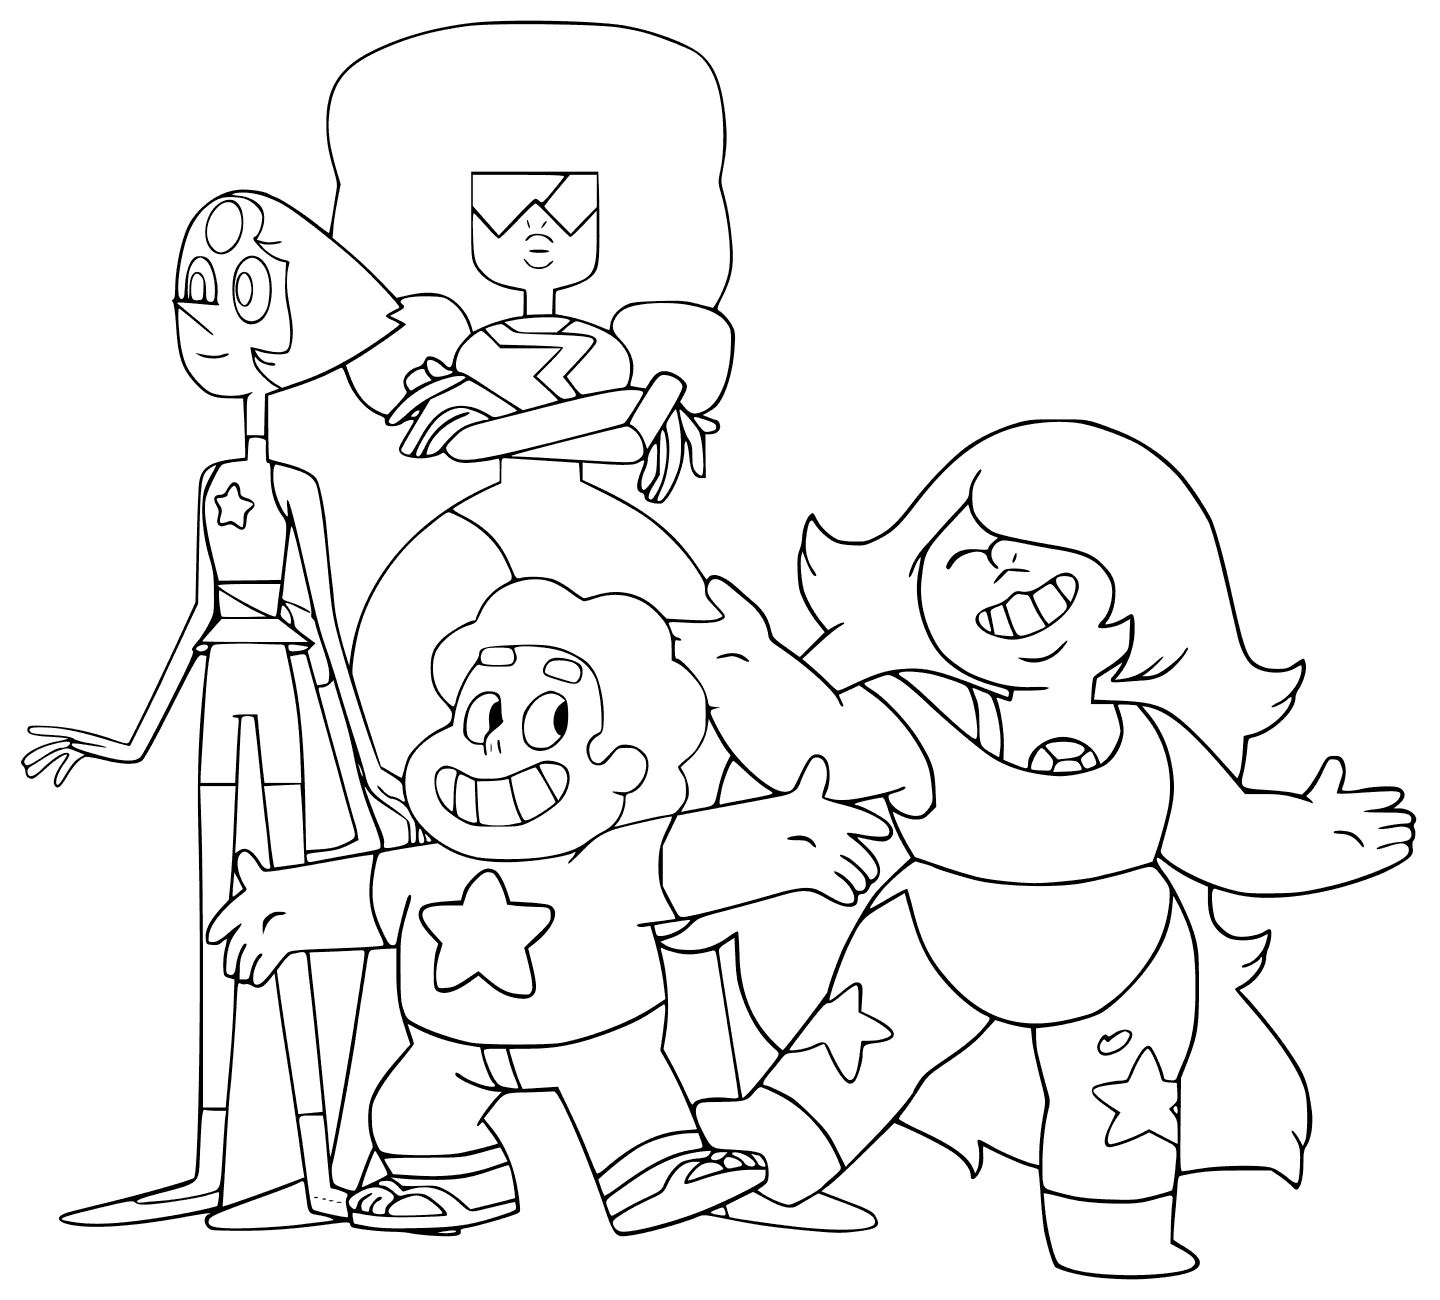 Free Printable Steven Universe Coloring Pages - Steven Universe Coloring  Pages - Coloring Pages For Kids And Adults